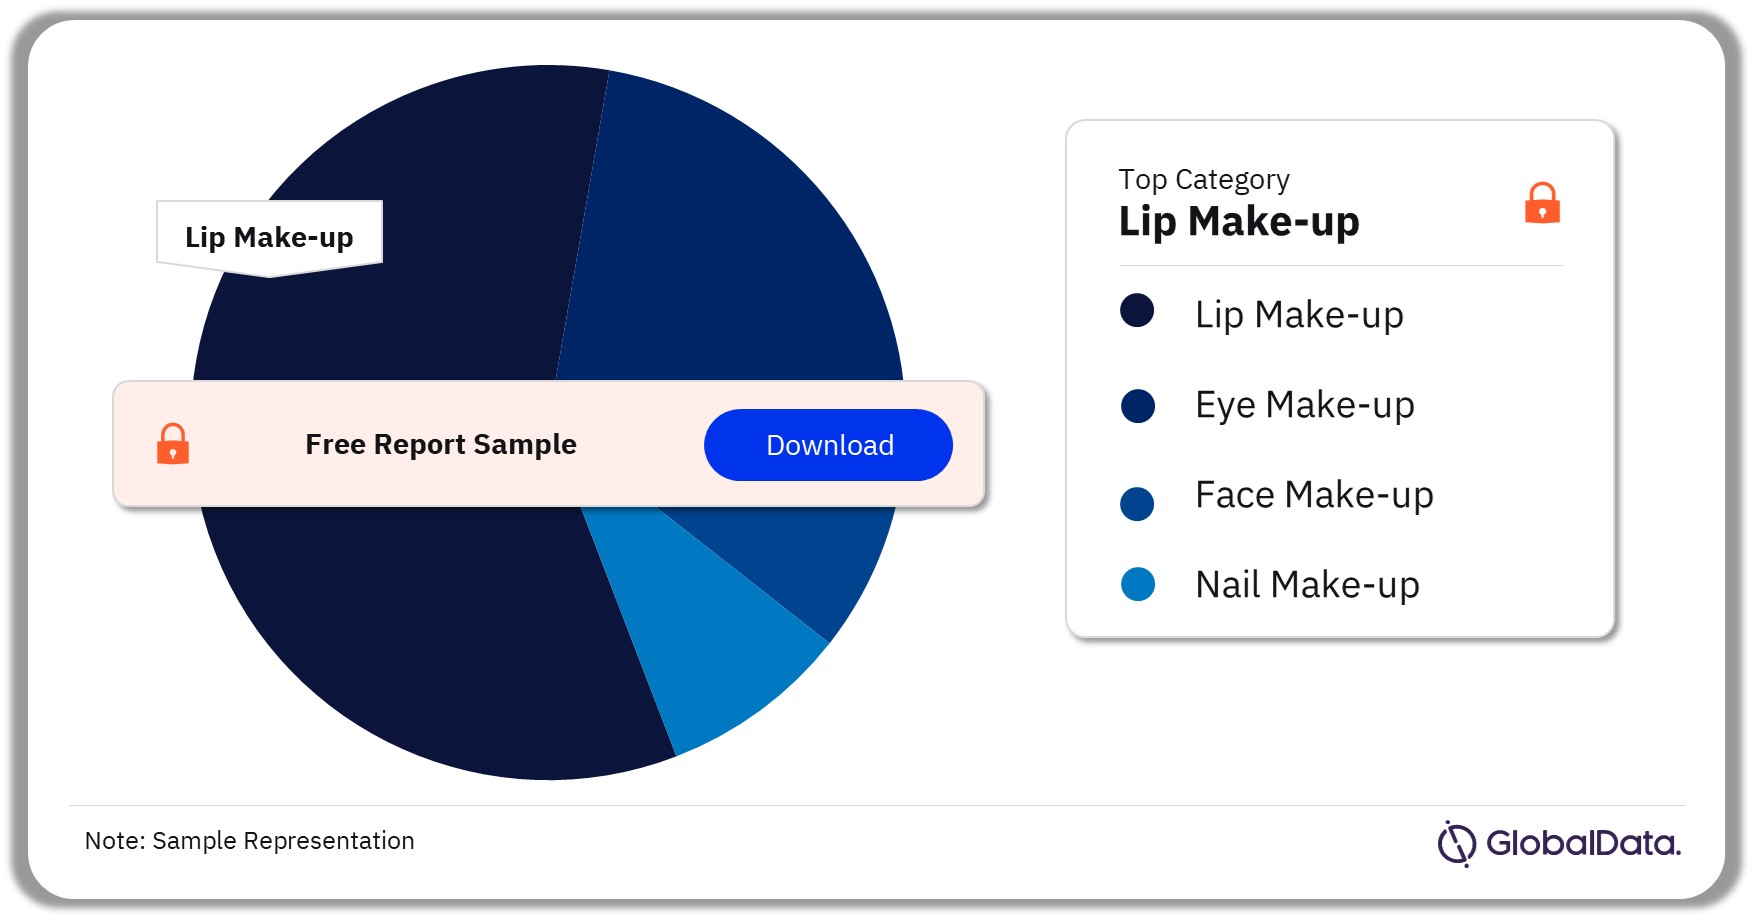 Malaysia Make-up Market Analysis by Categories, 2021 (%)